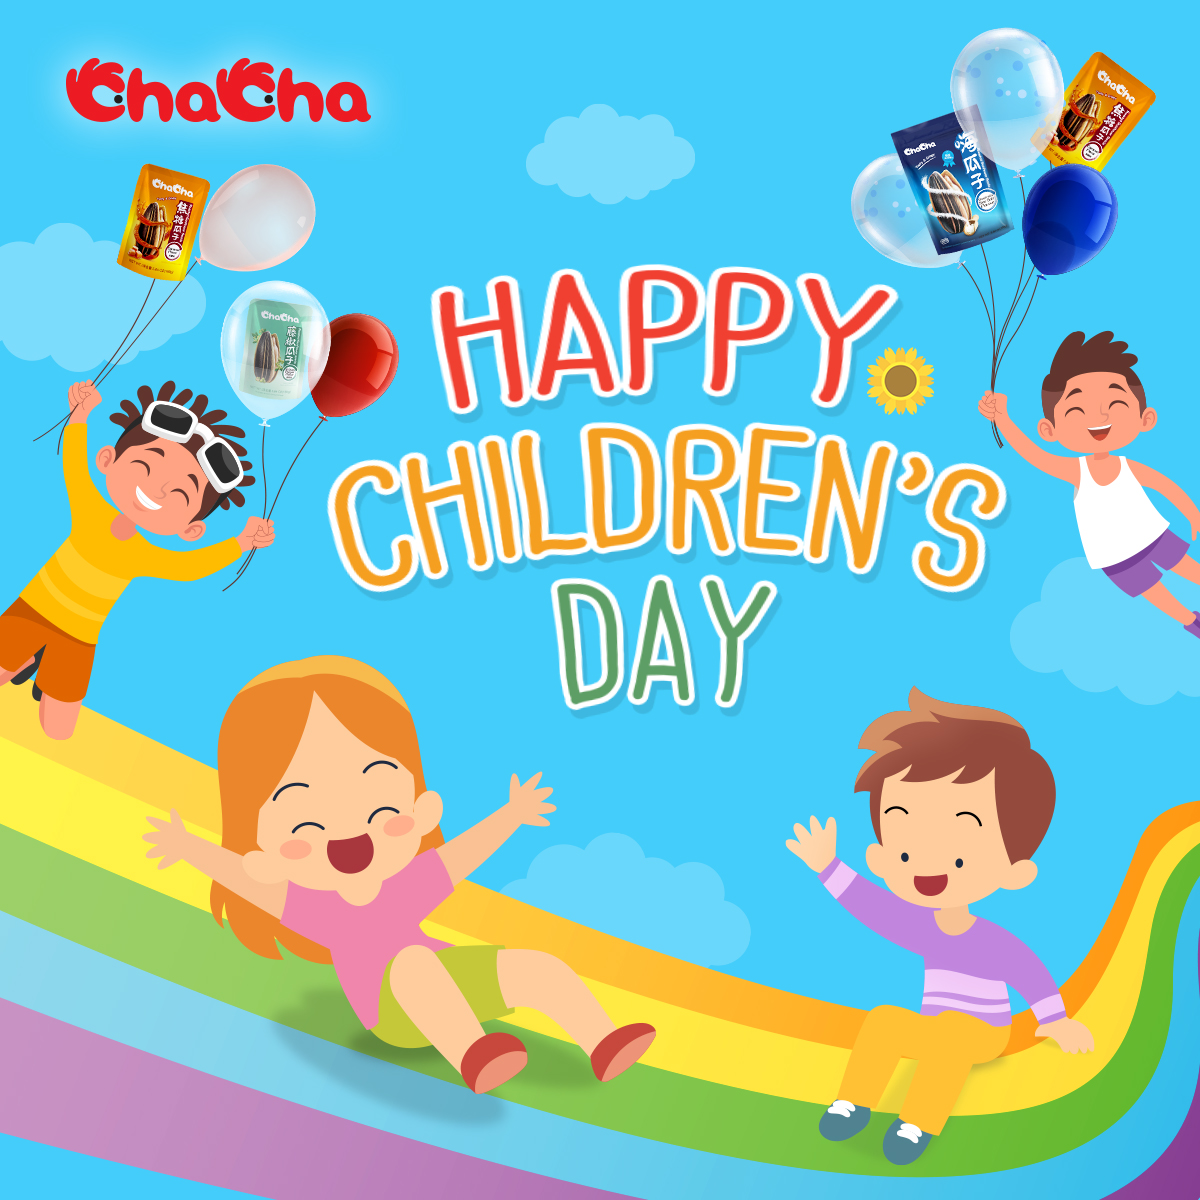 #ChaChaFestival #HappyChildrensDay
🥳🥳Wishing all the children a wonderful children’s day！
May all of you smile like a sunflower.🌻
Always shine, bright, and vibrant.😊
#ChaChaMoment